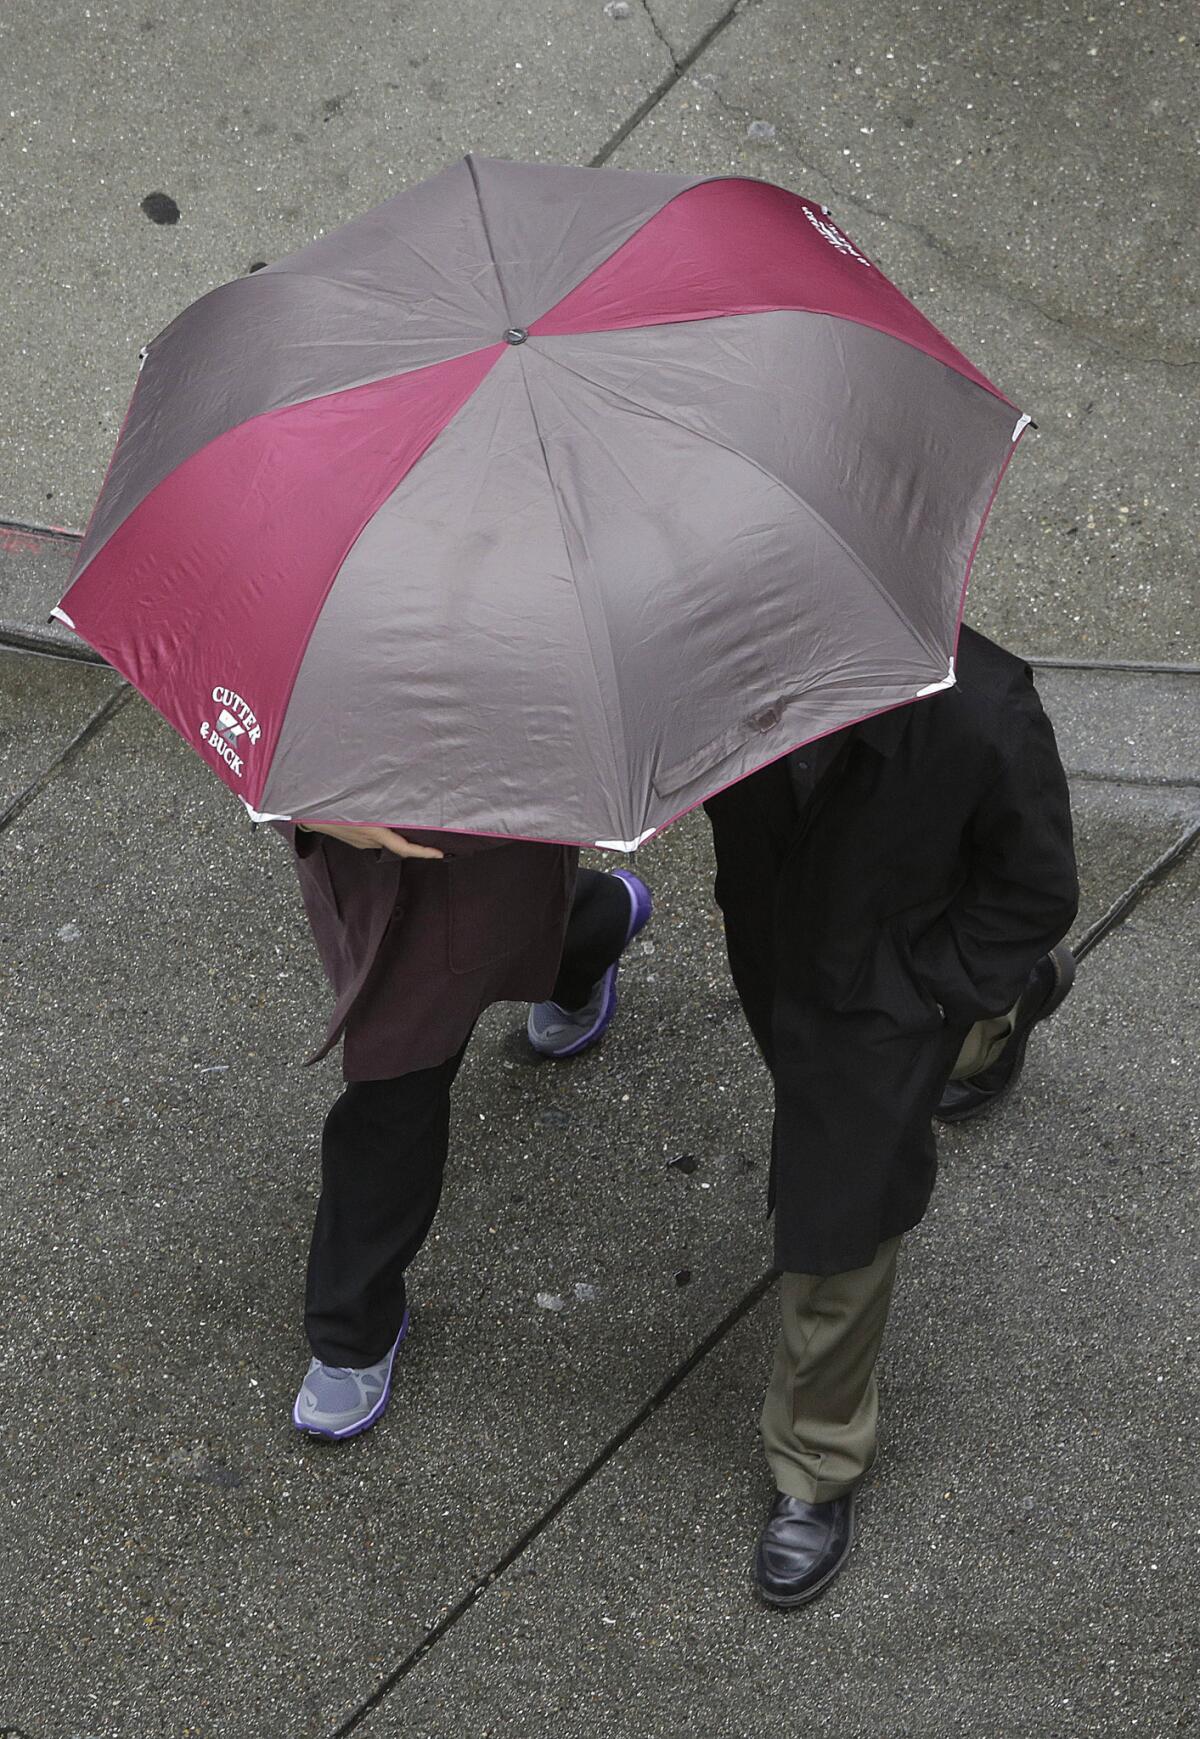 A woman and man walk under an umbrella as they cross a street in San Francisco on Thursday.